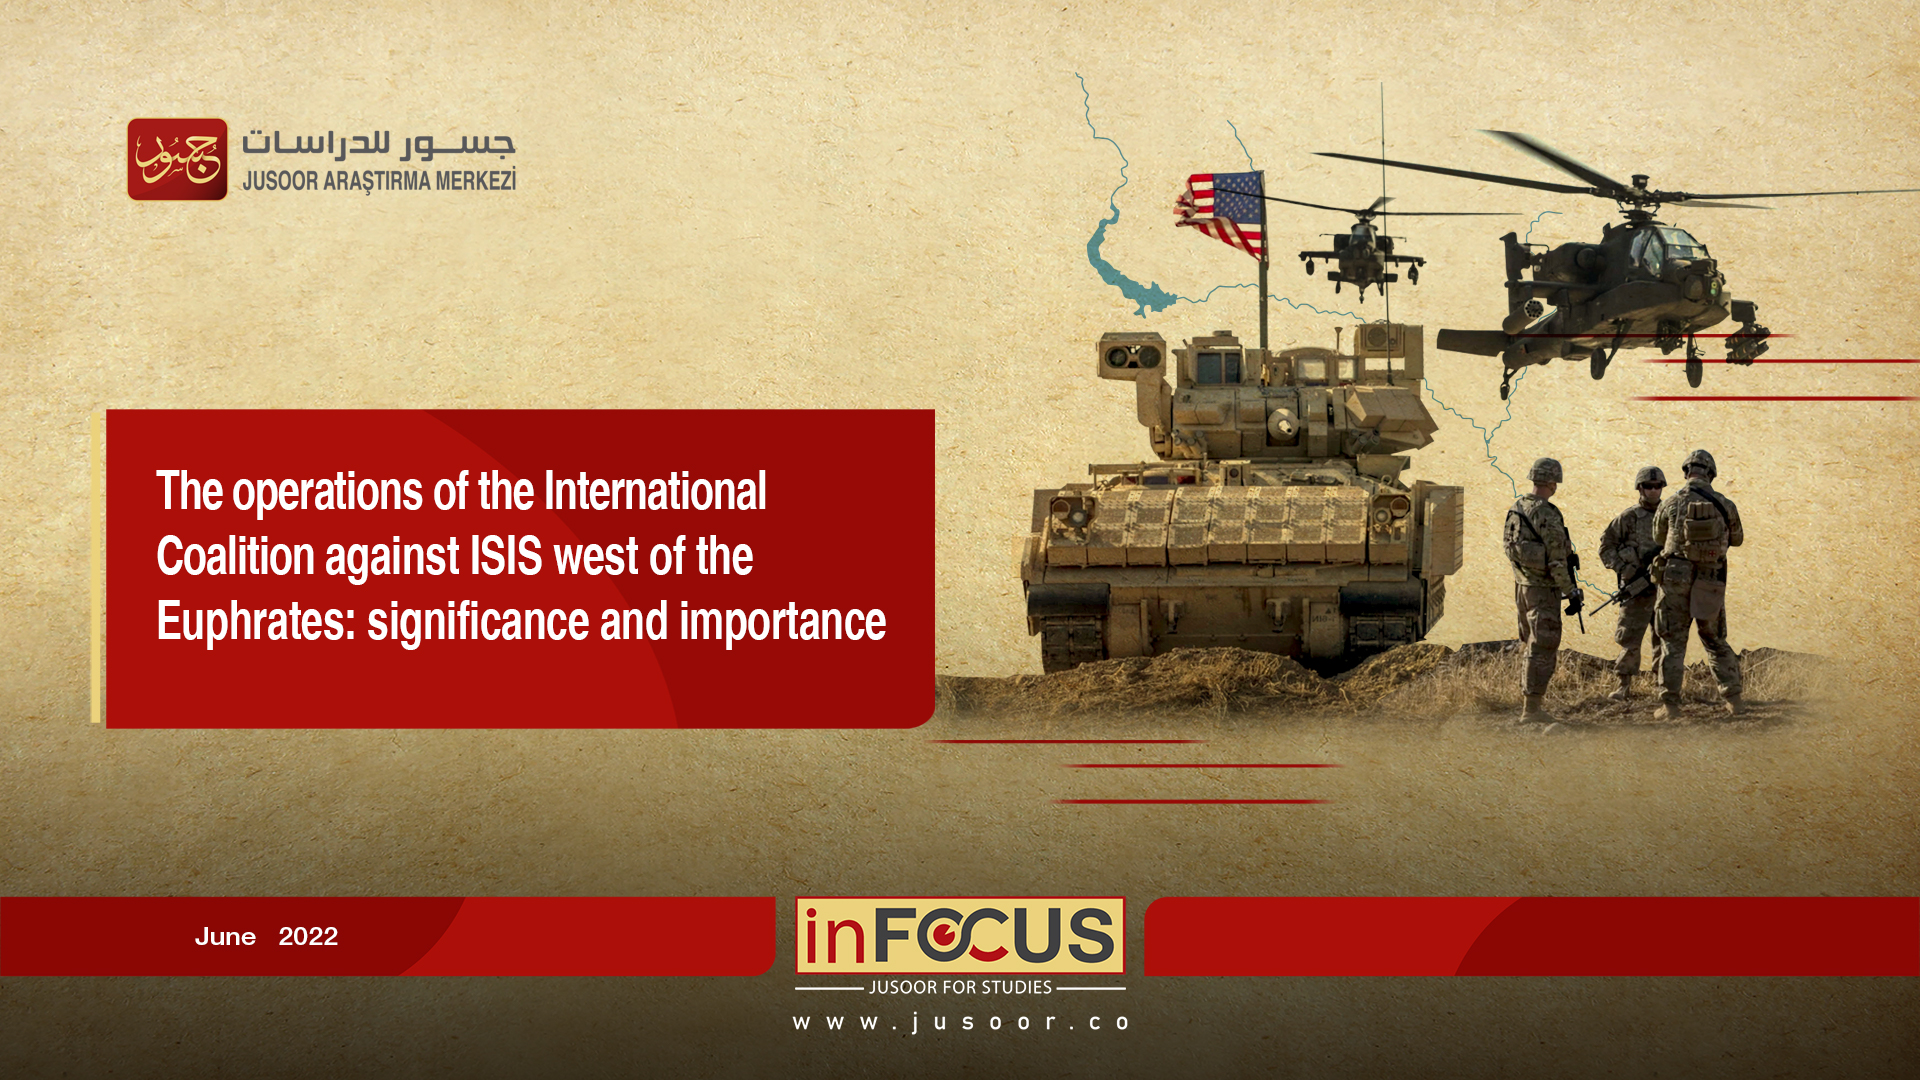 The operations of the International Coalition against ISIS west of the Euphrates: significance and importance